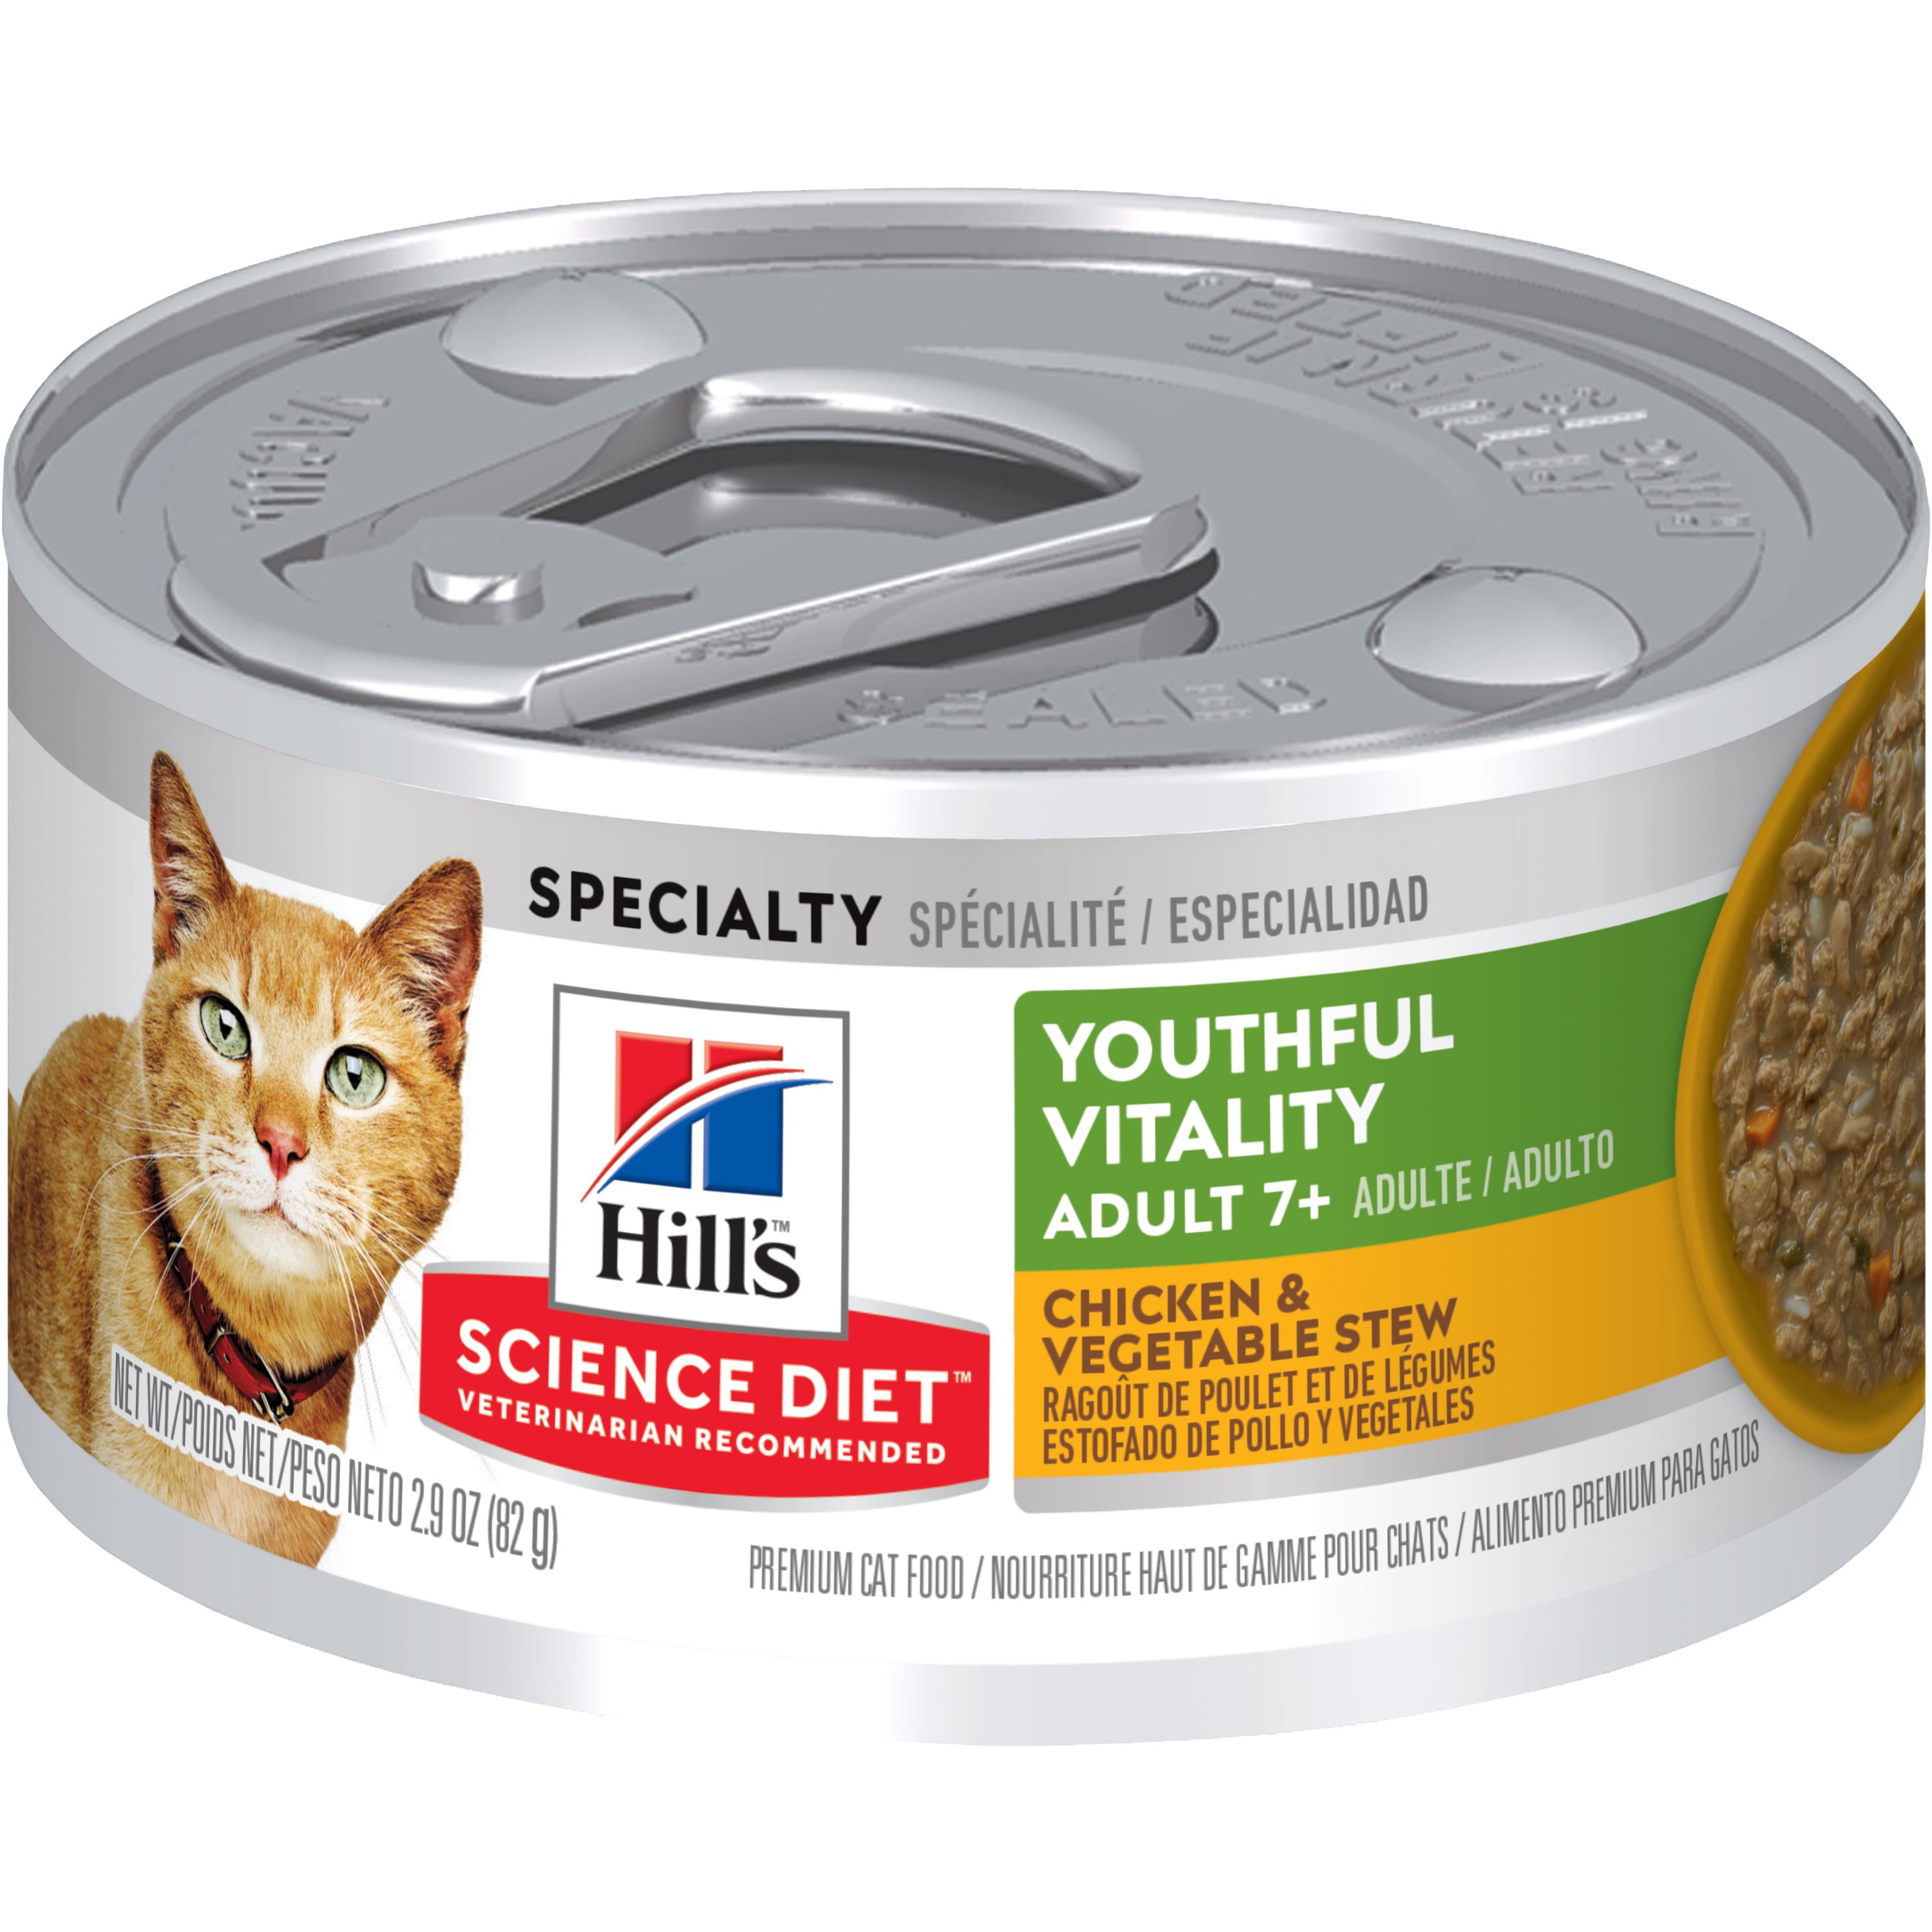 Hill's Science Diet Senior 7+ Youthful Vitality Canned Cat Food